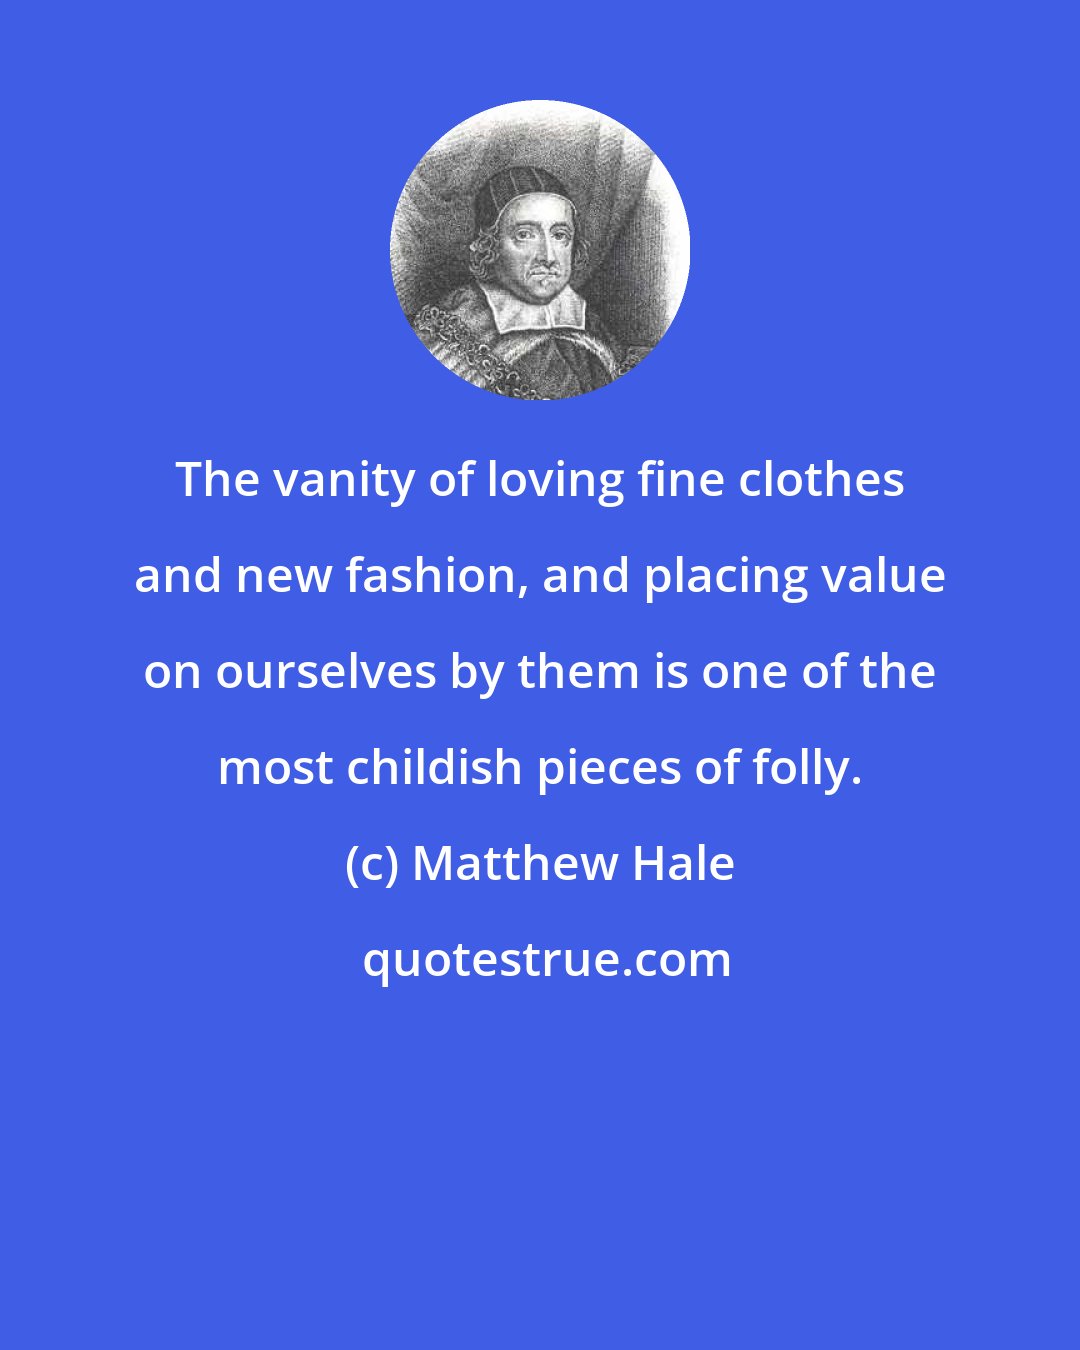 Matthew Hale: The vanity of loving fine clothes and new fashion, and placing value on ourselves by them is one of the most childish pieces of folly.